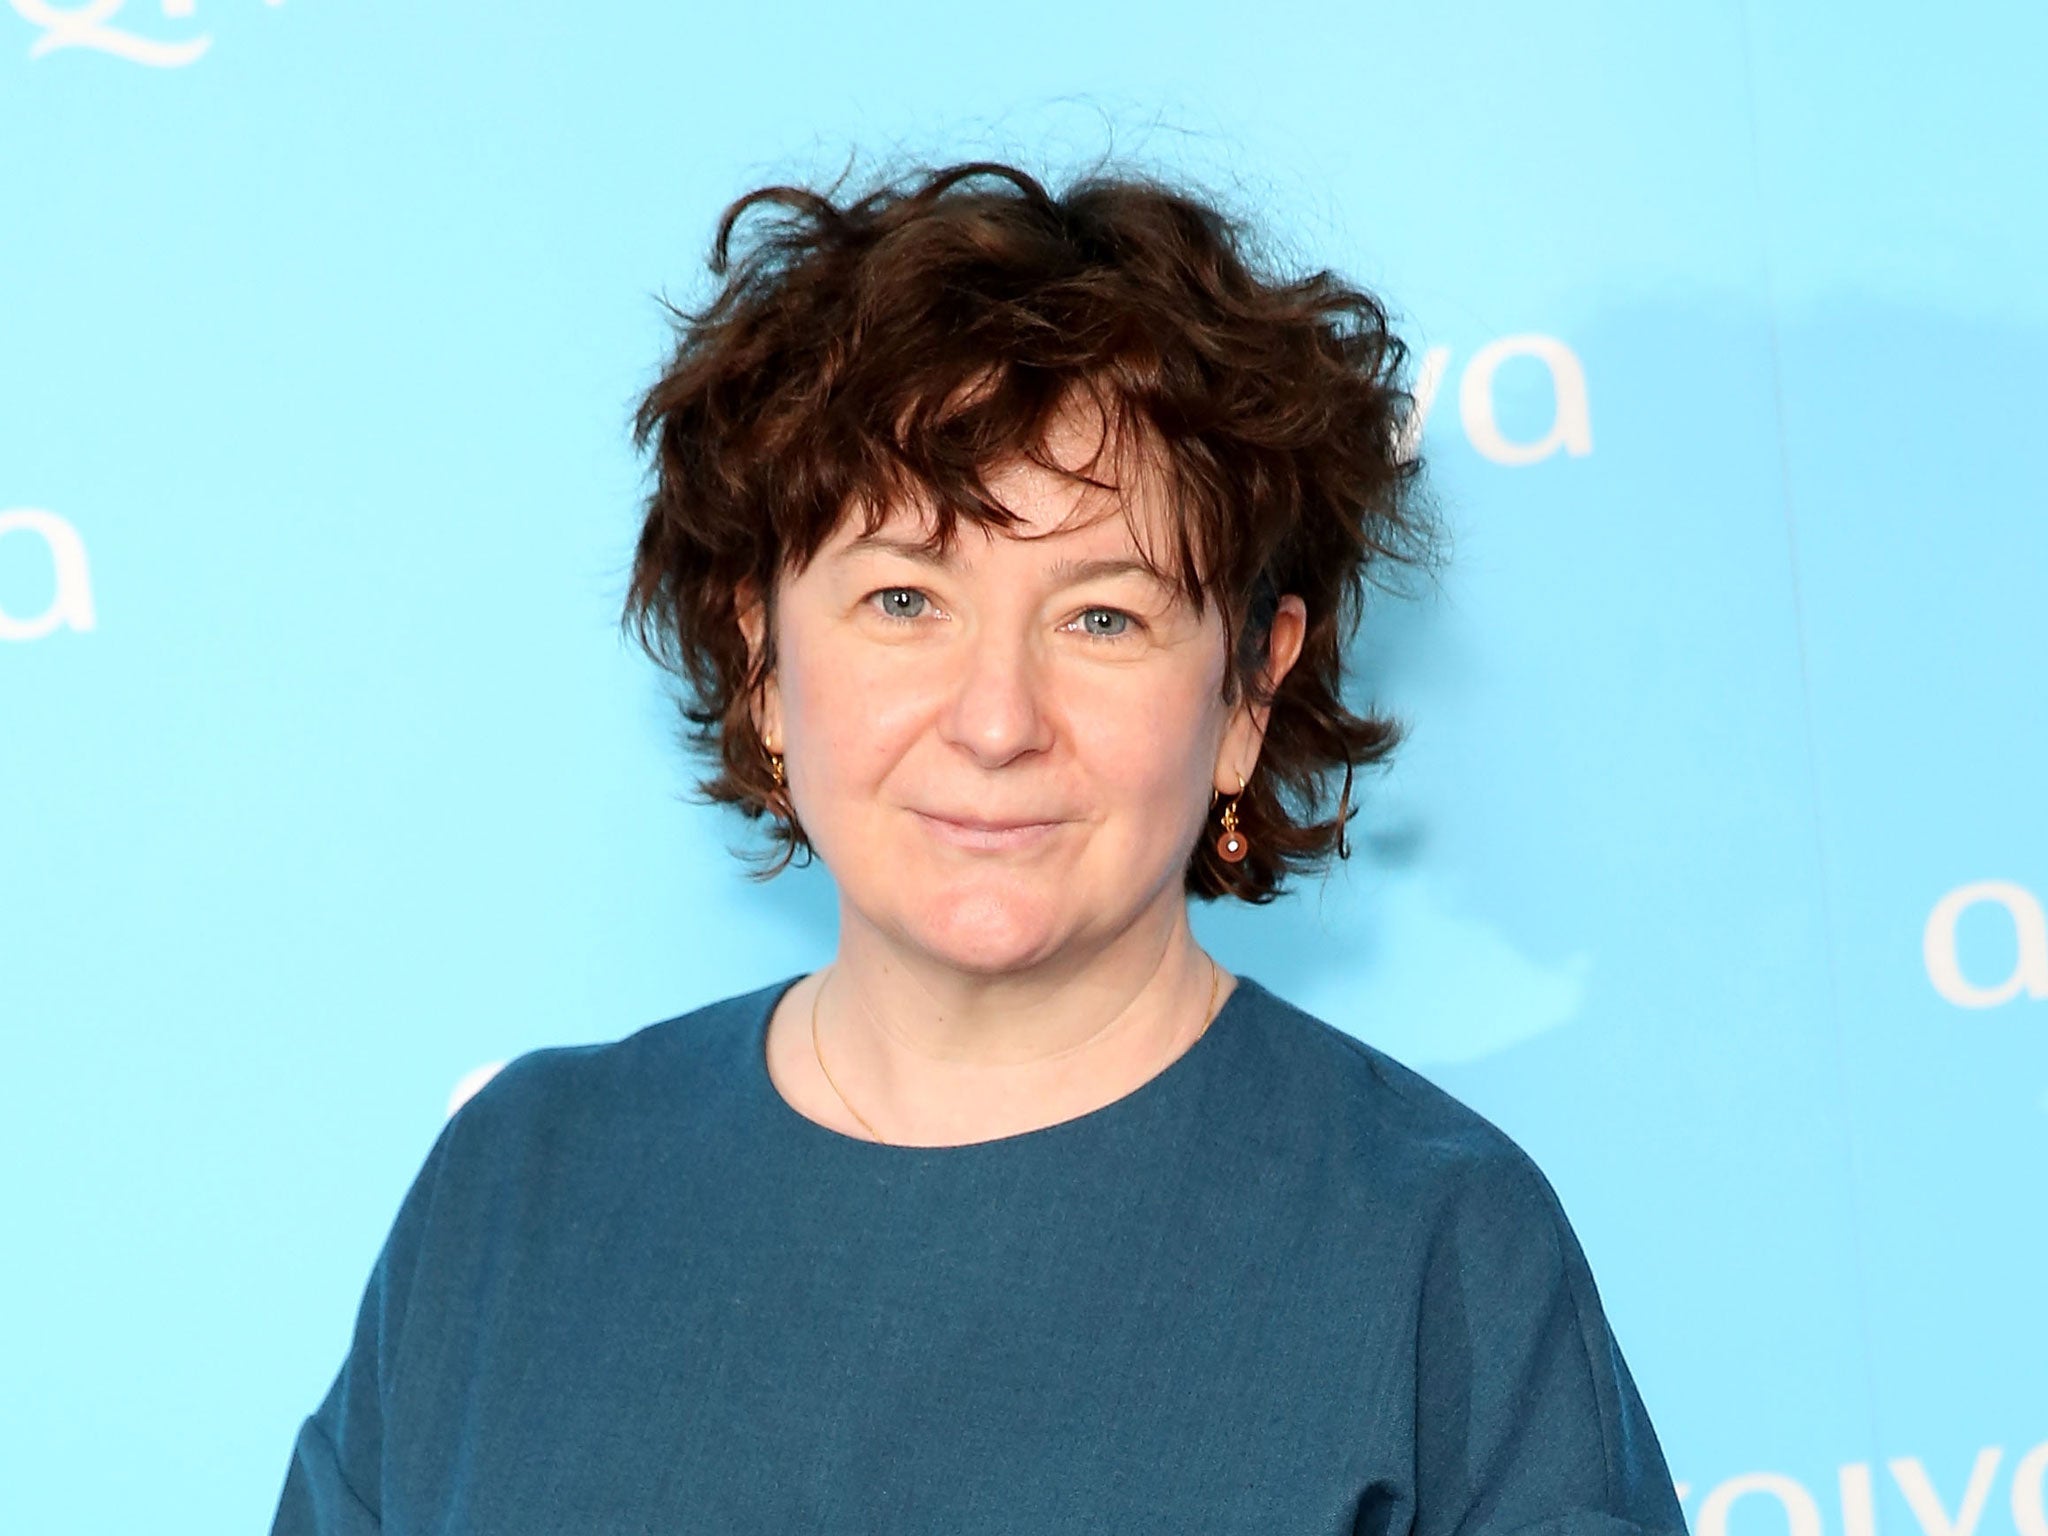 Host Jane Garvey revealed how she'd 'spent an informative hour or two watching porn at work'